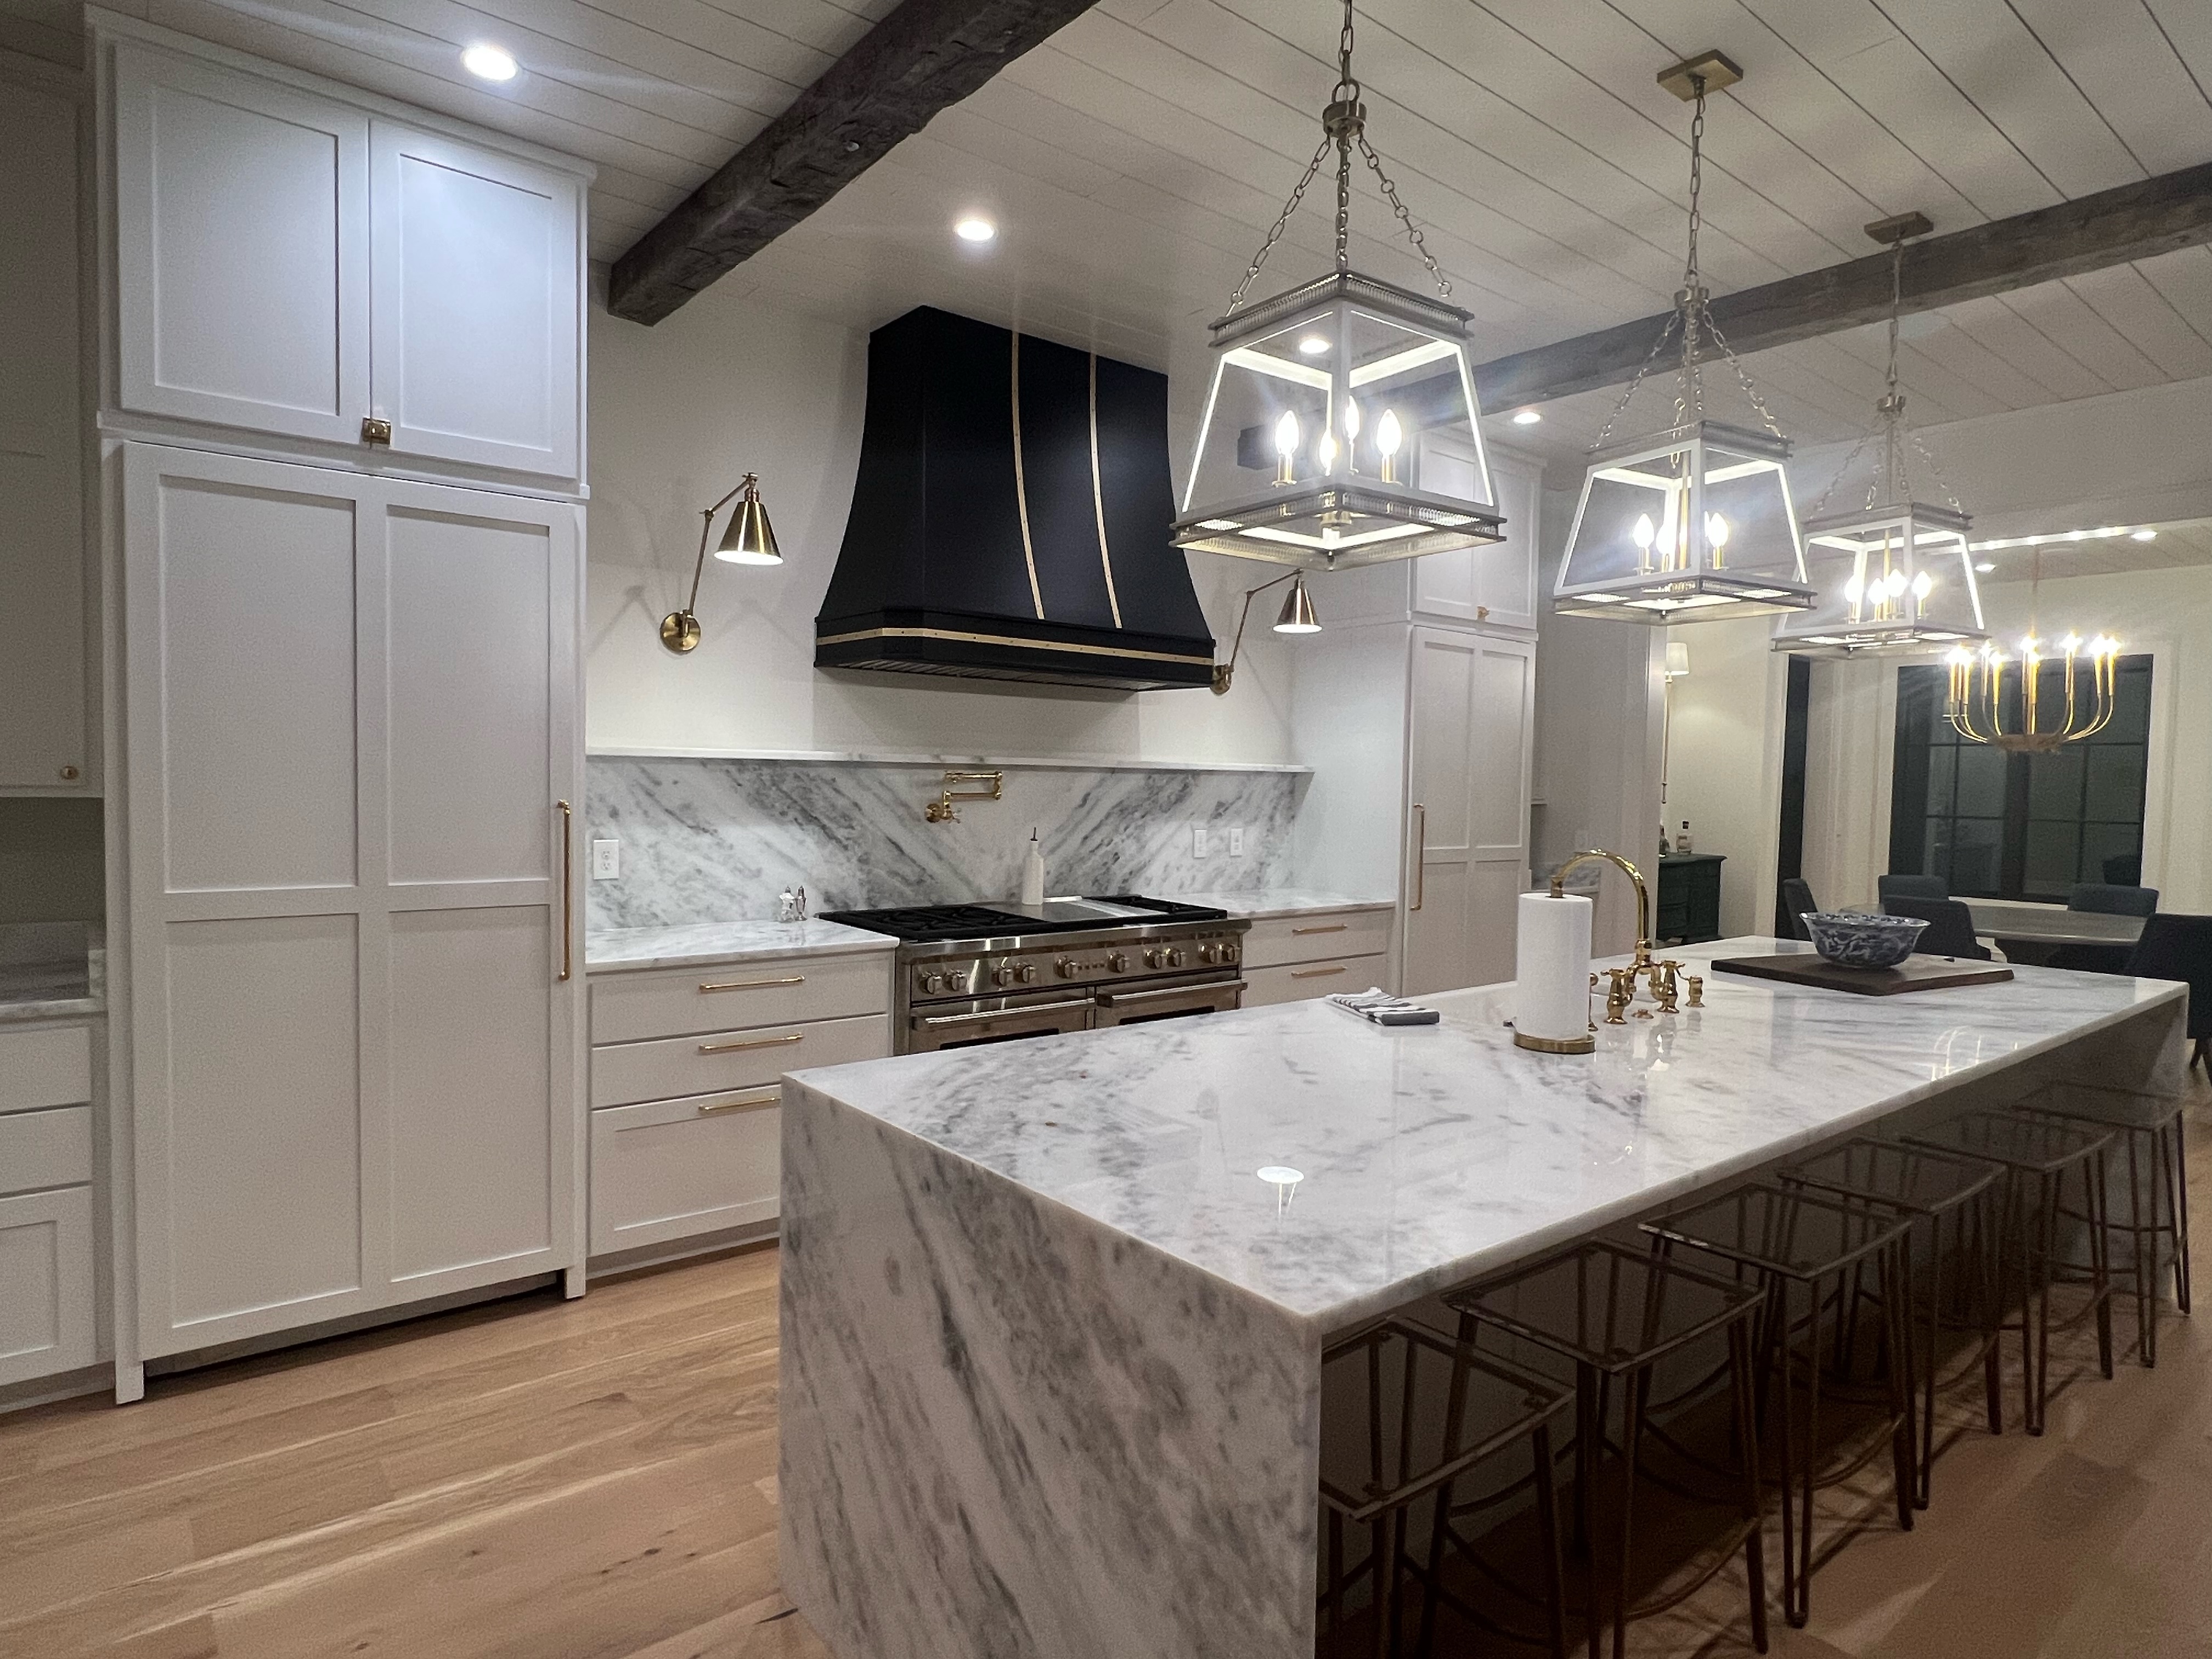 Incorporate a sleek marble backsplash with white kitchen cabinets stainless steel range hood for a coastal-inspired kitchen design